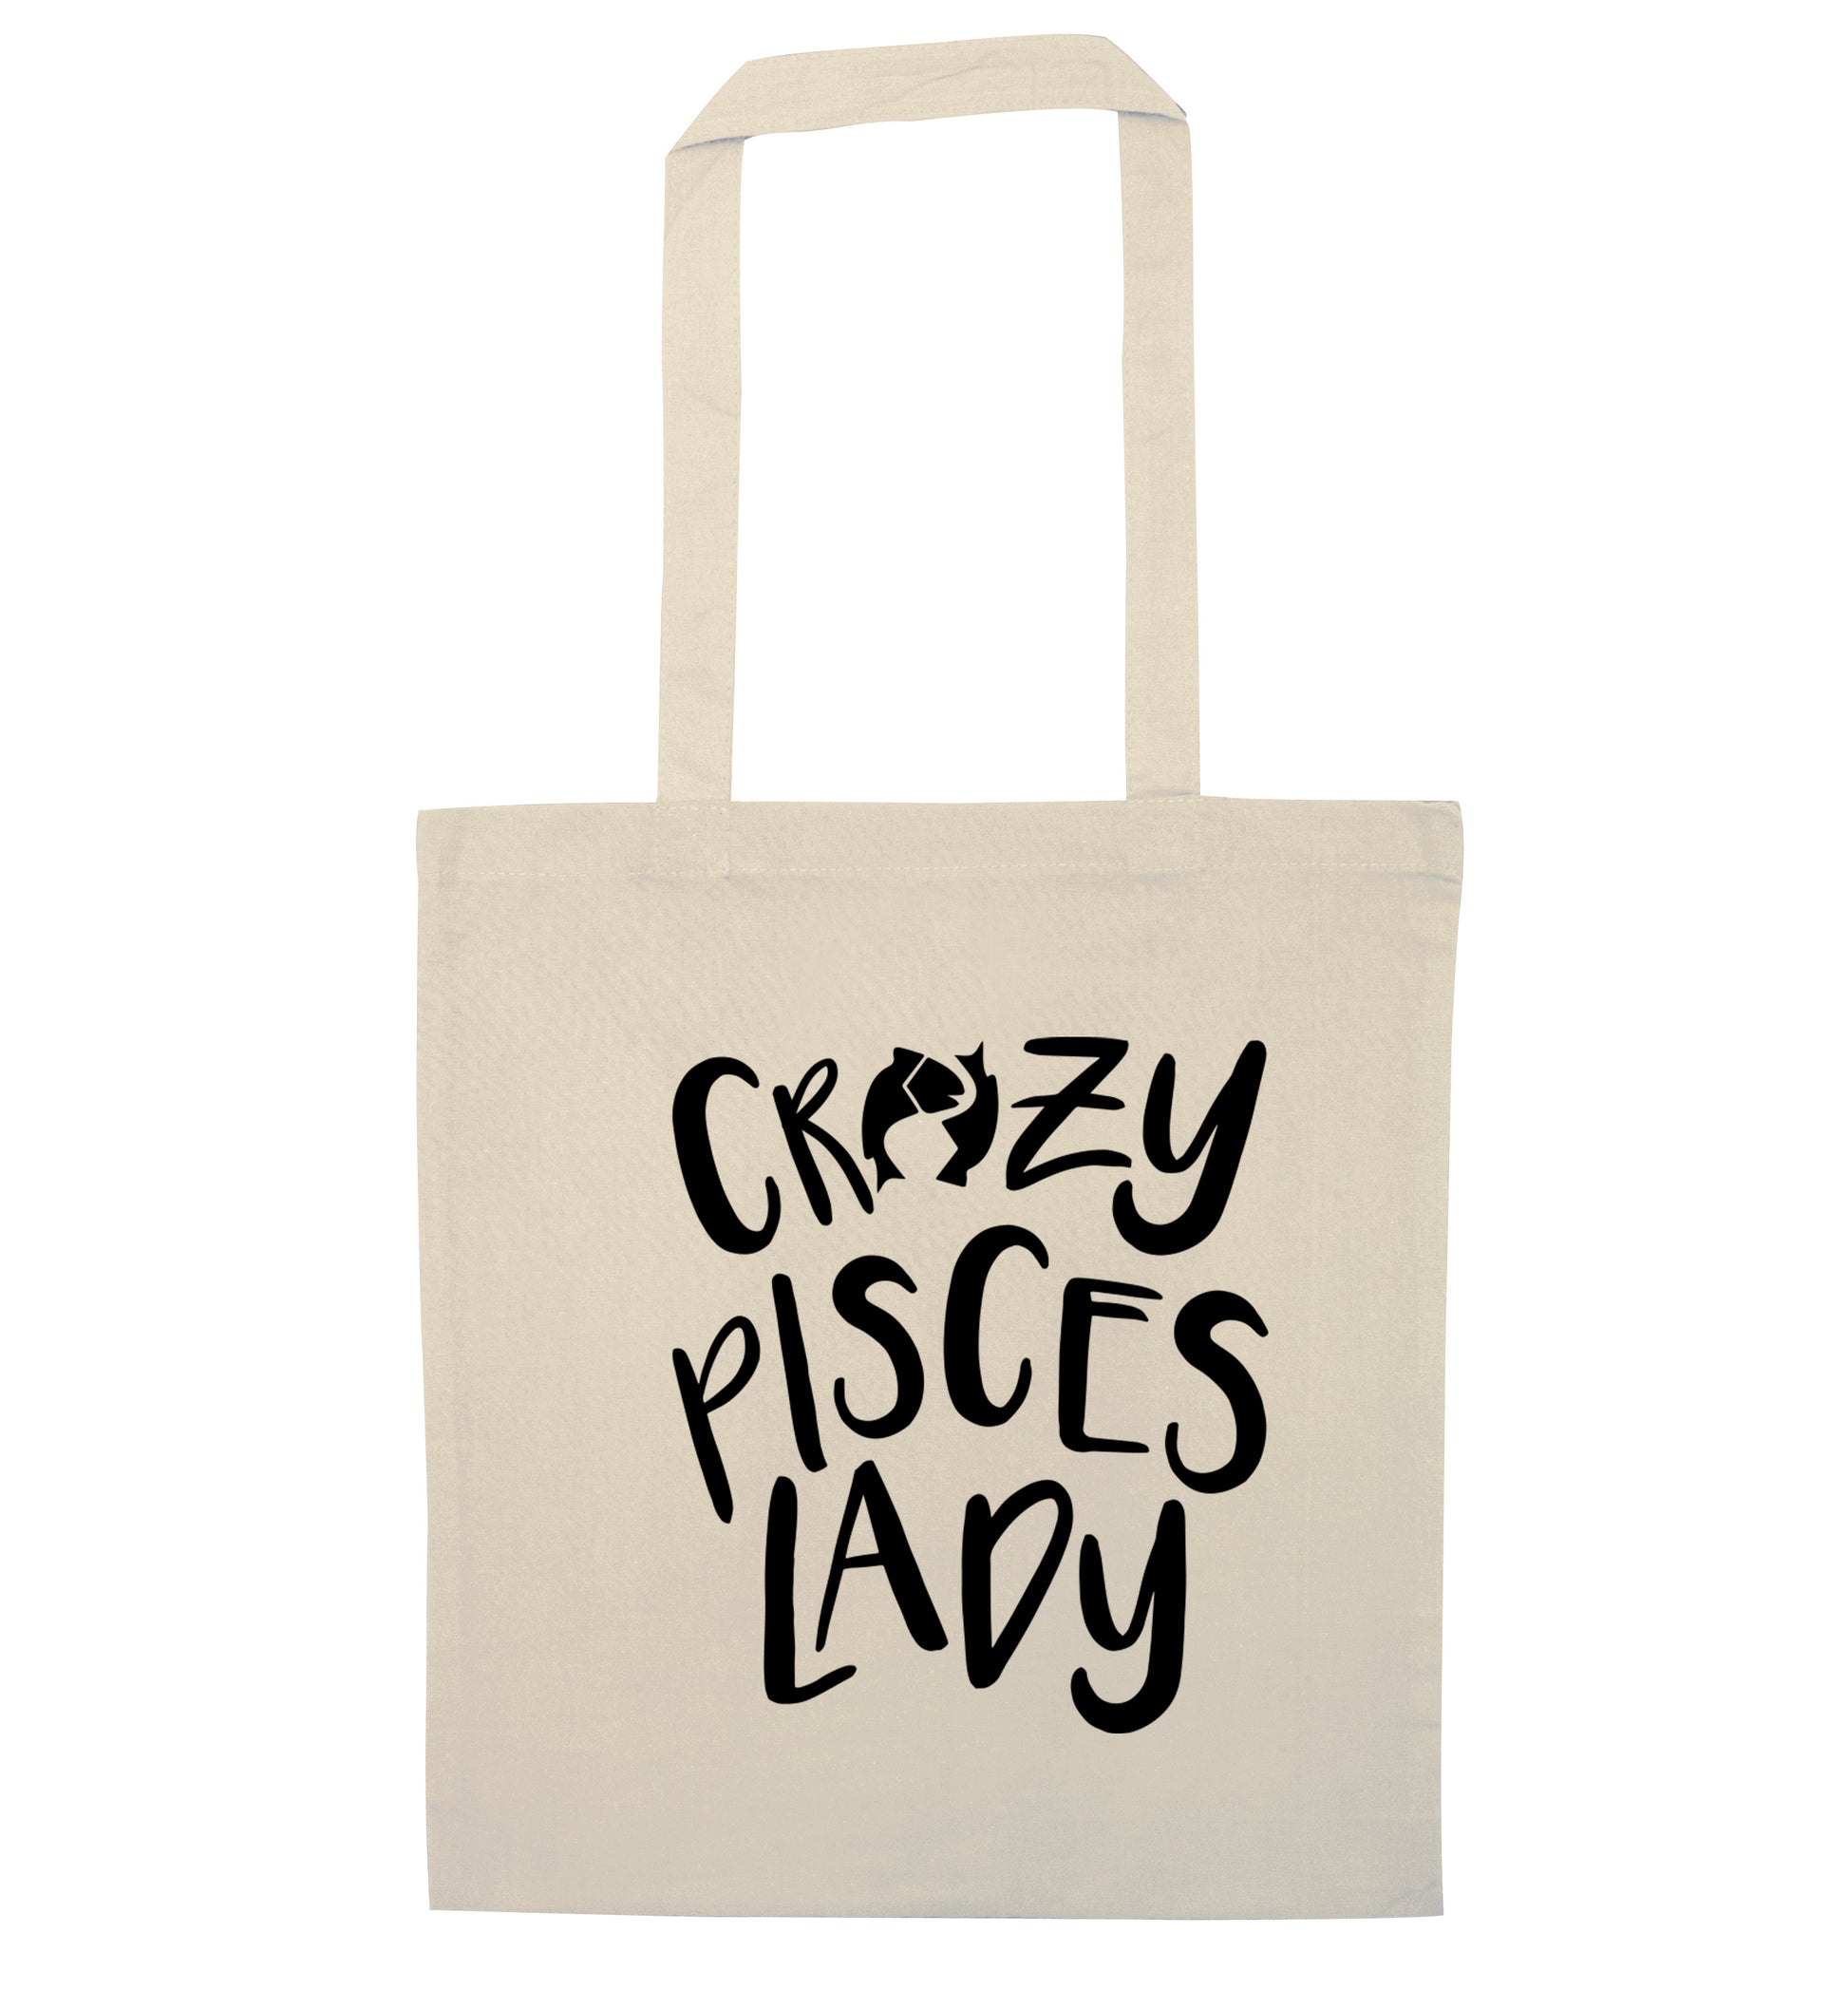 Crazy pisces Lady natural tote bag